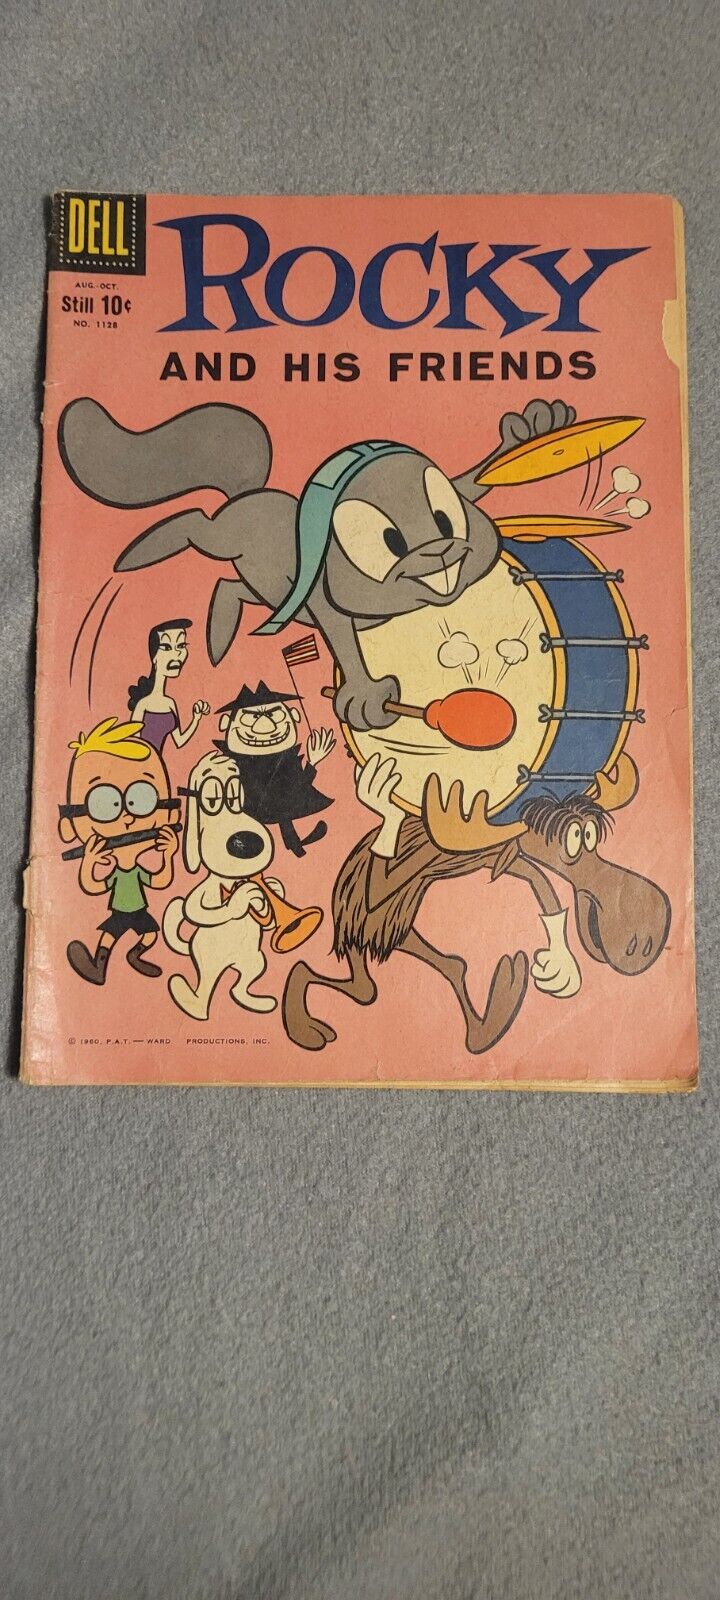 Rocky And His Friends #1128, Oct. 1960